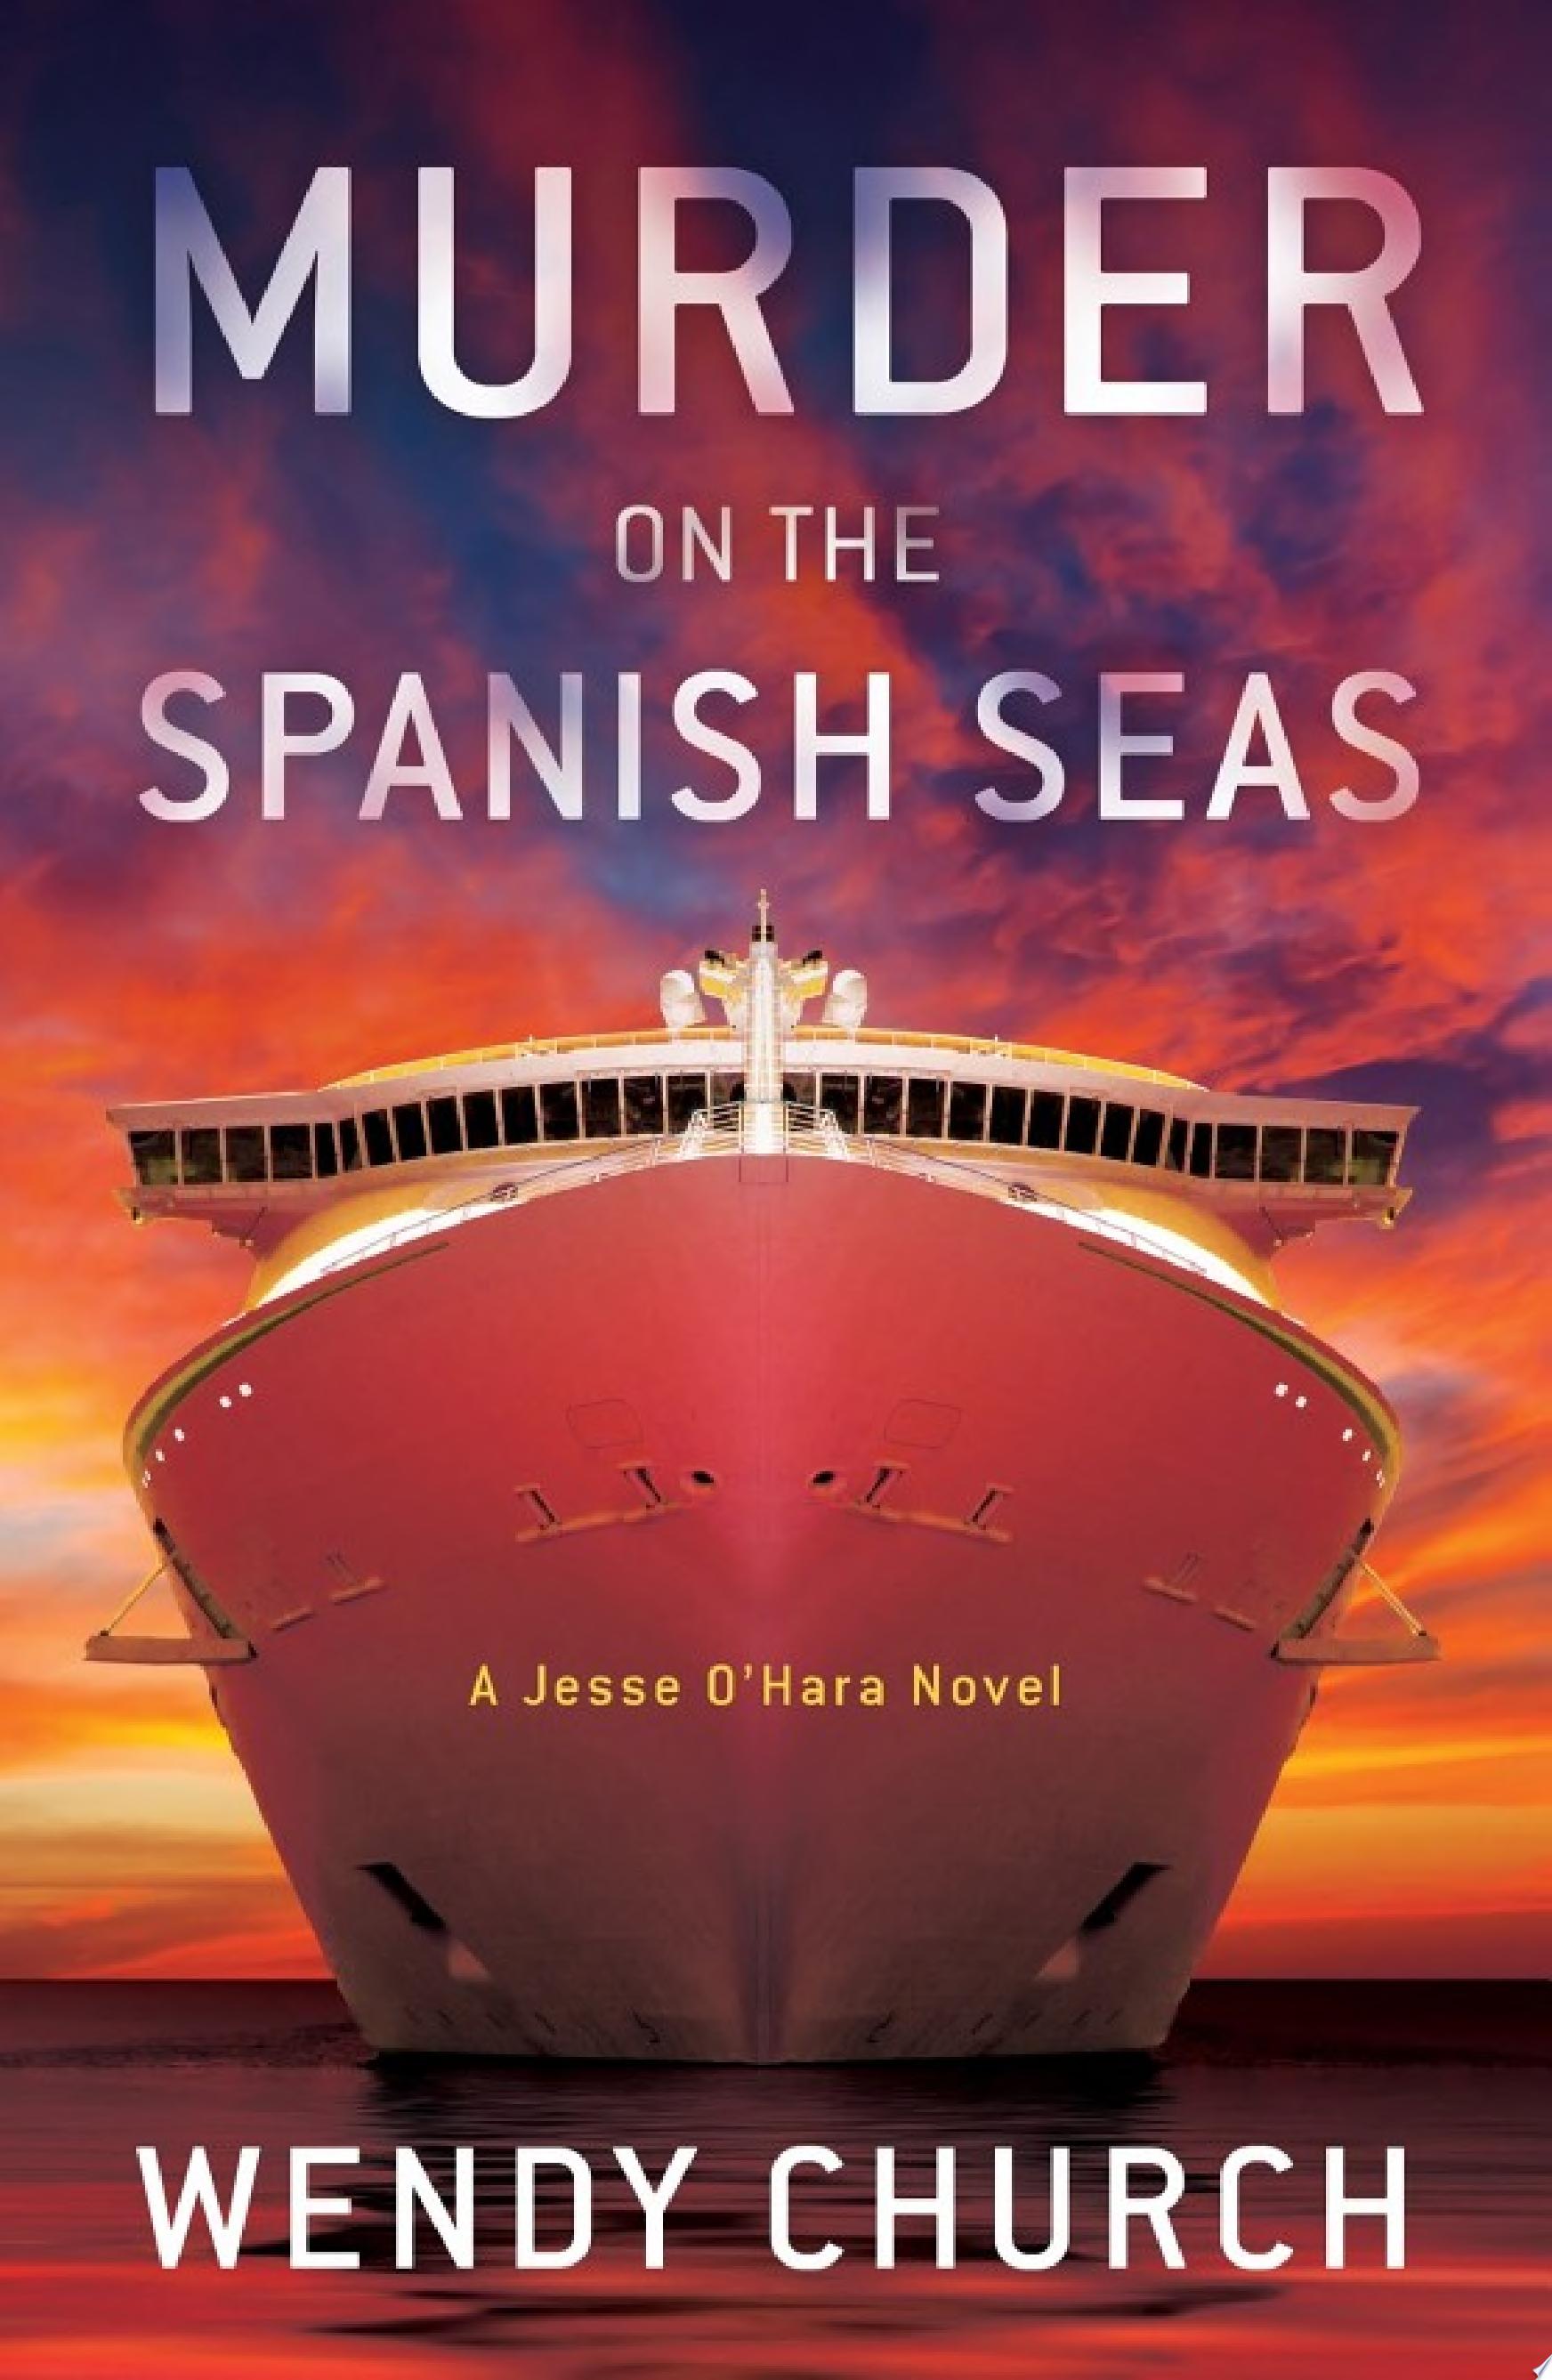 Image for "Murder on the Spanish Seas"